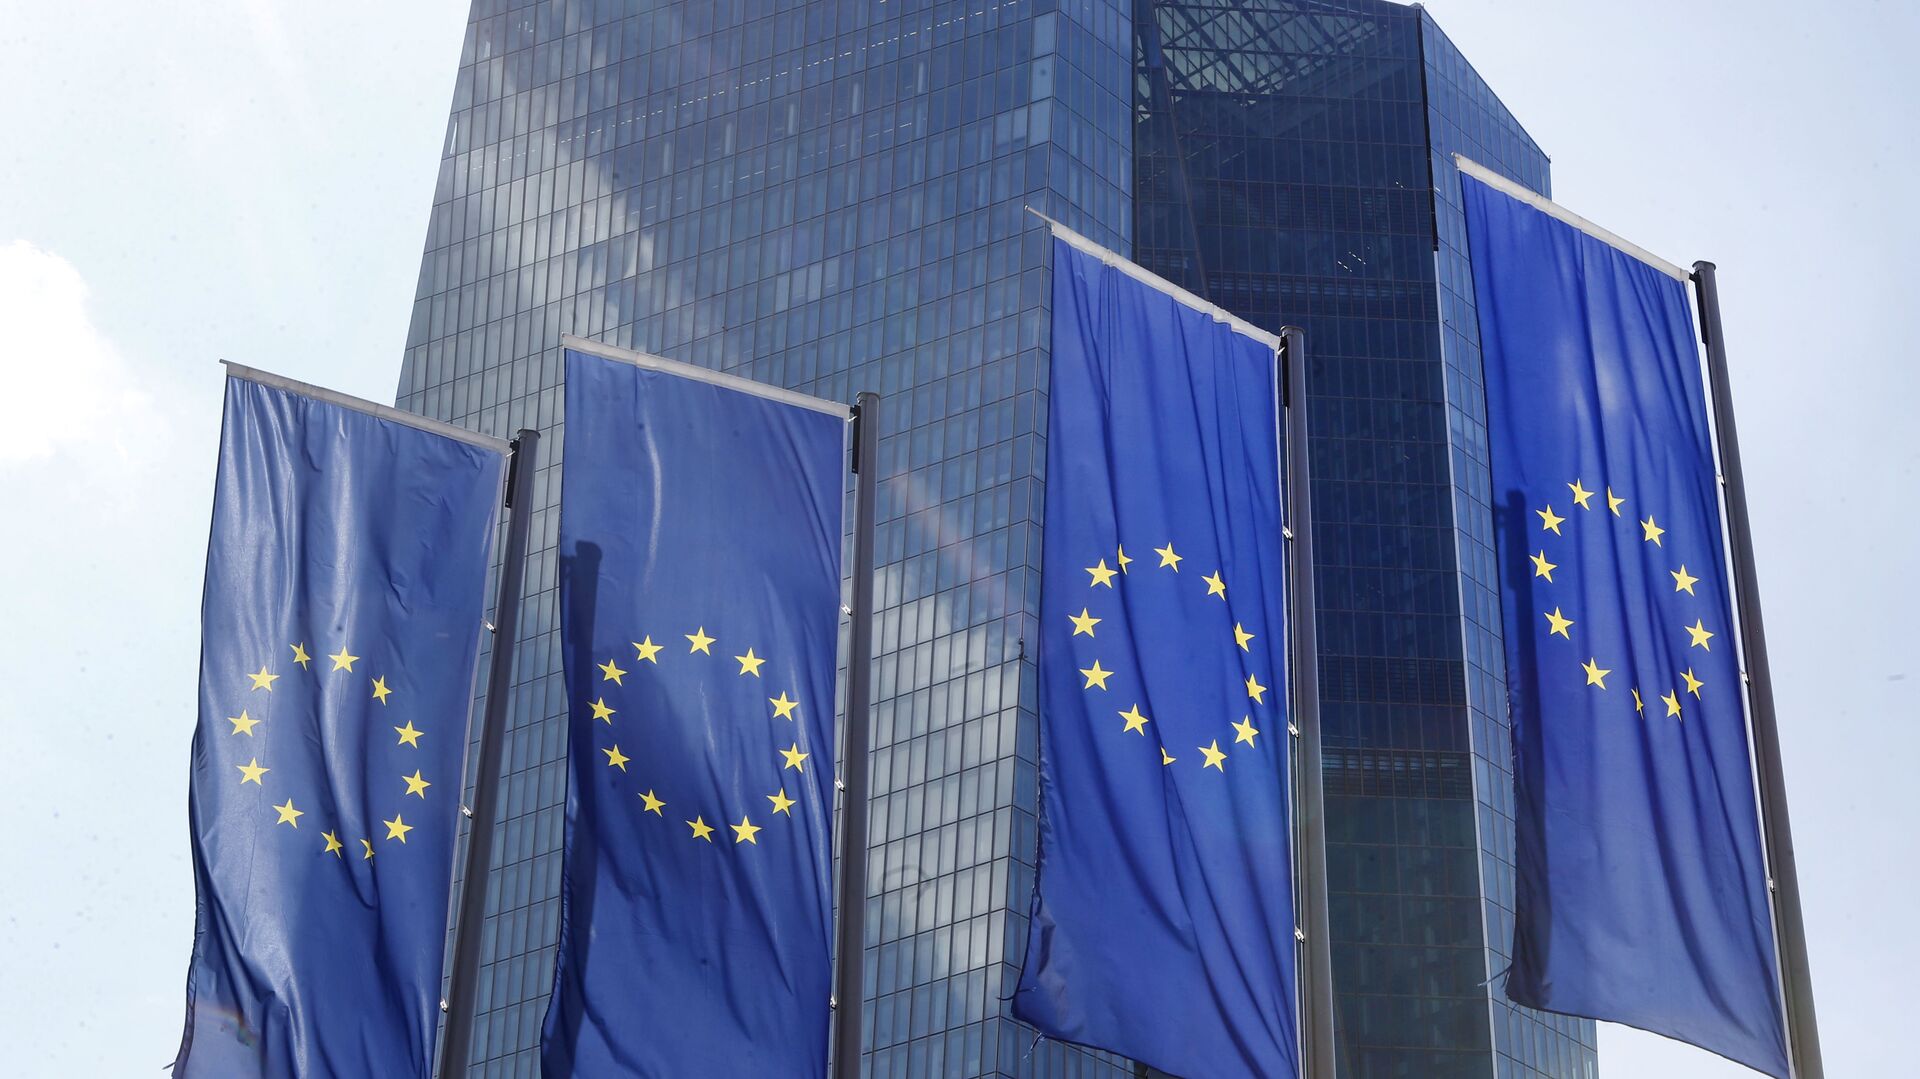 EU flags at the European Central Bank's headquarters in Frankfurt, Germany